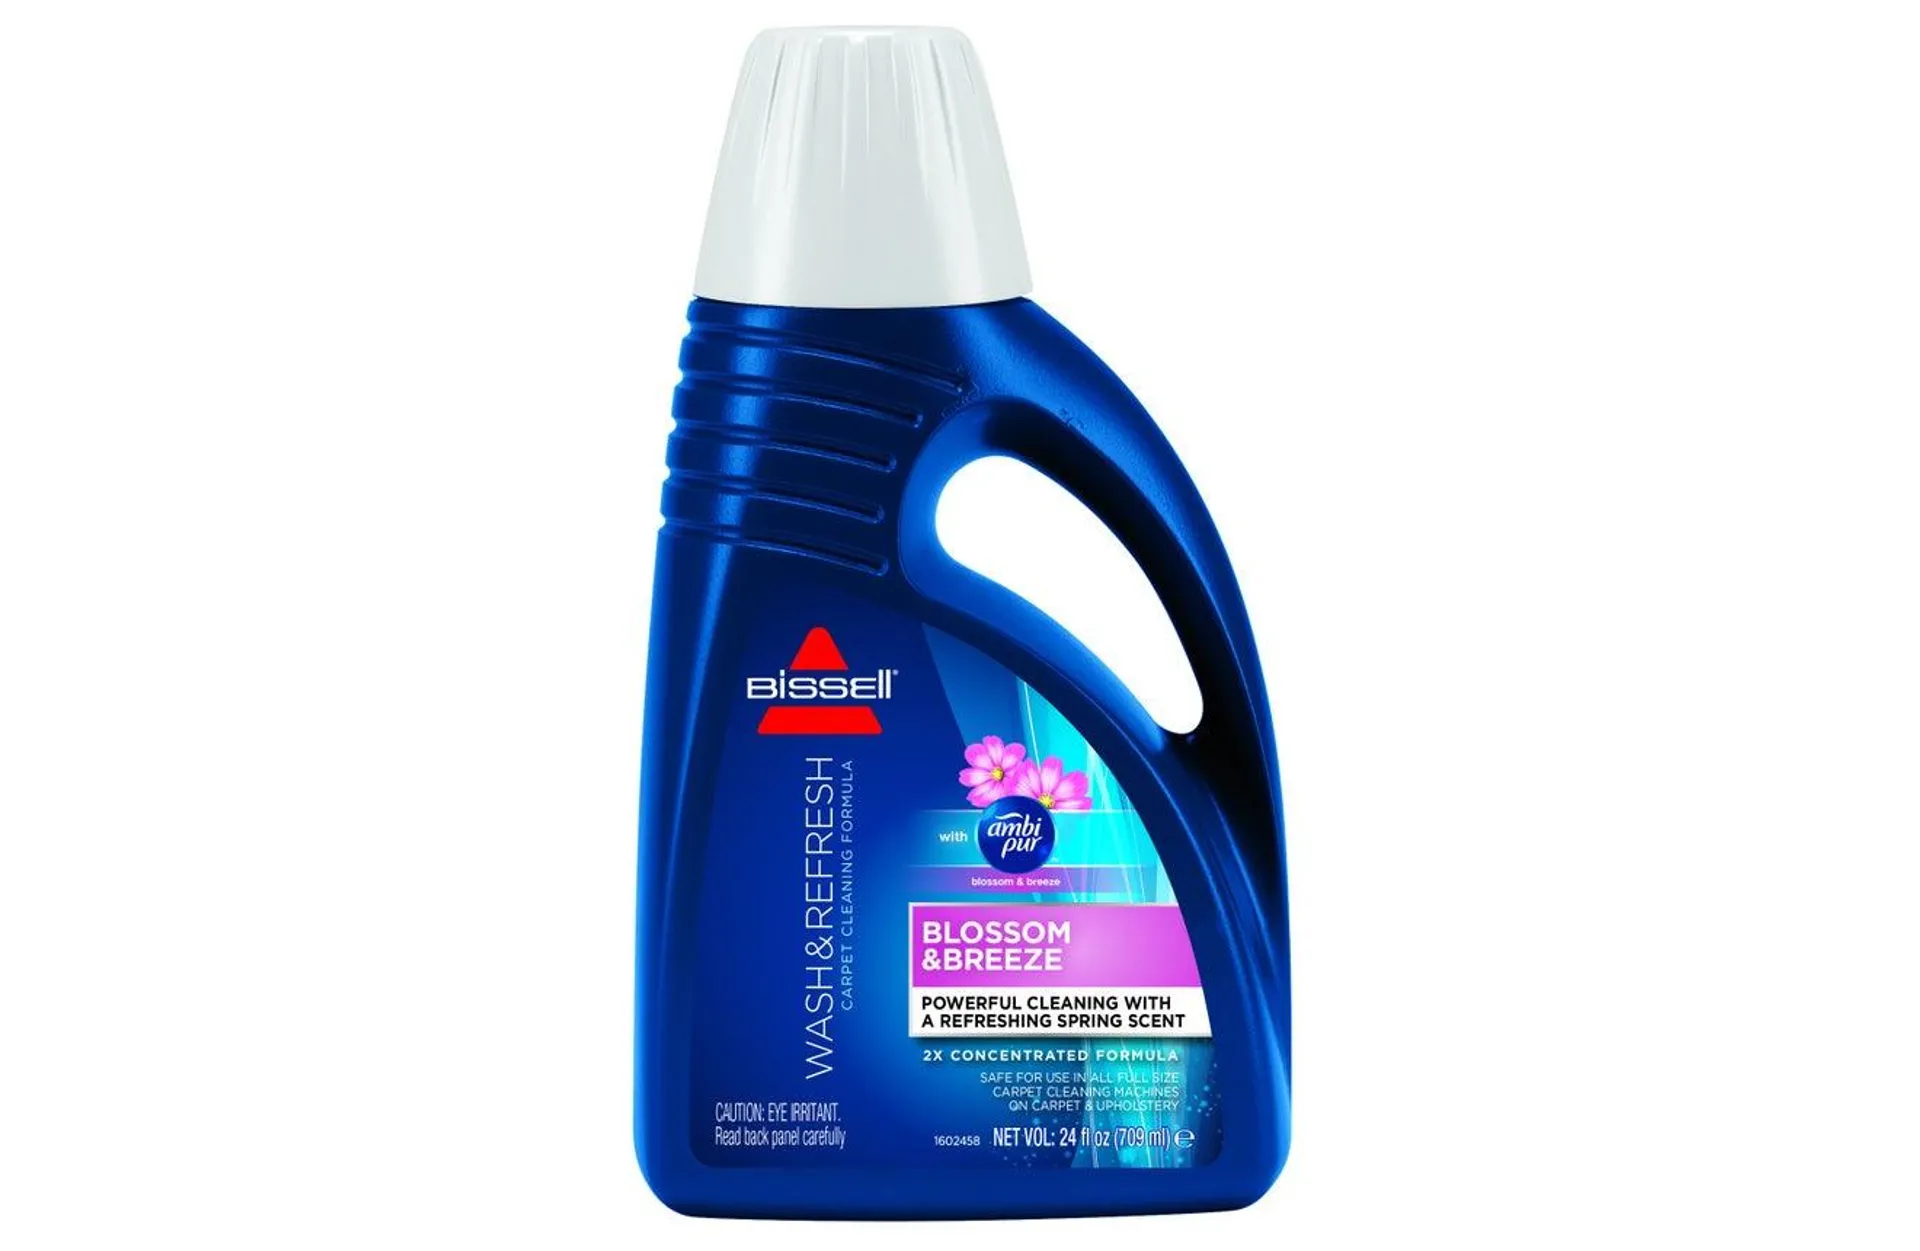 Bissell 2X Blossom and Breeze Formula - 1248E